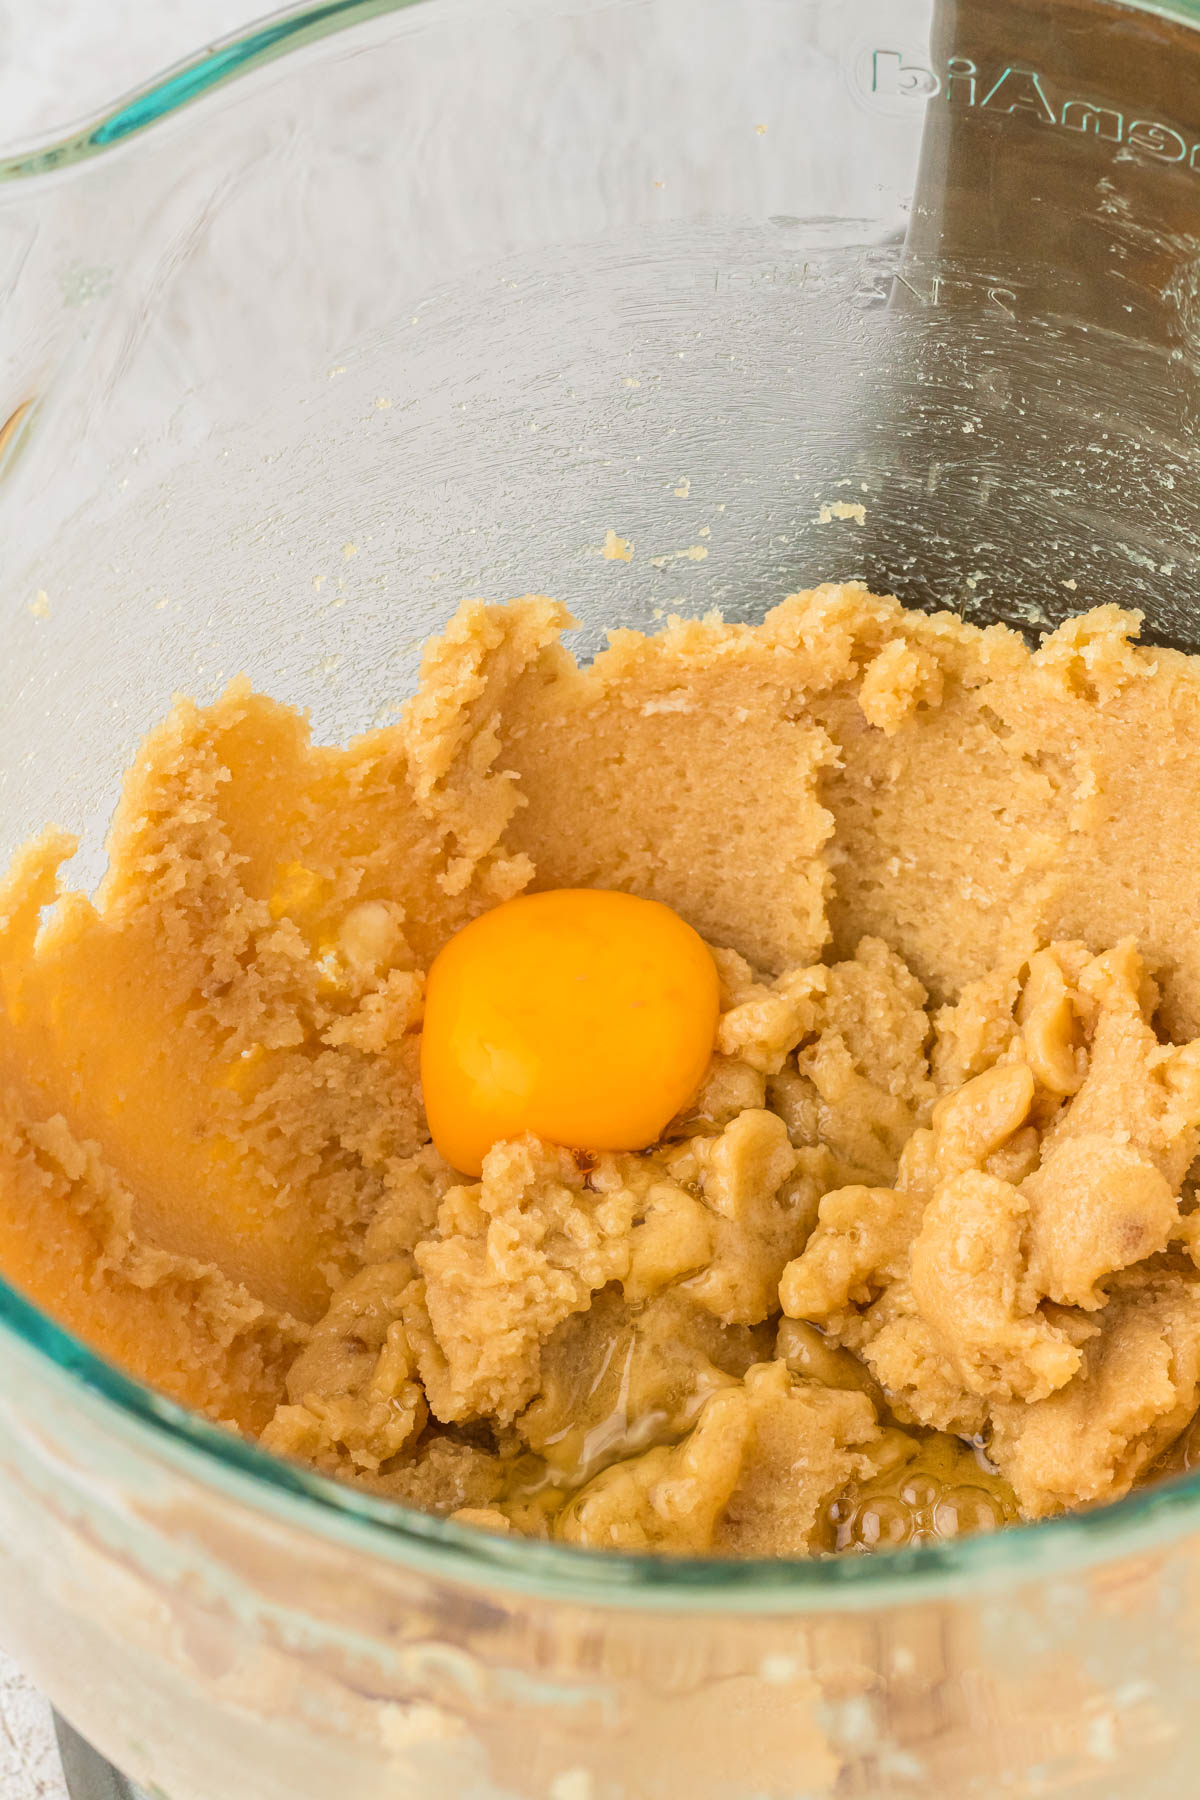 Egg being mixed into cookie dough.